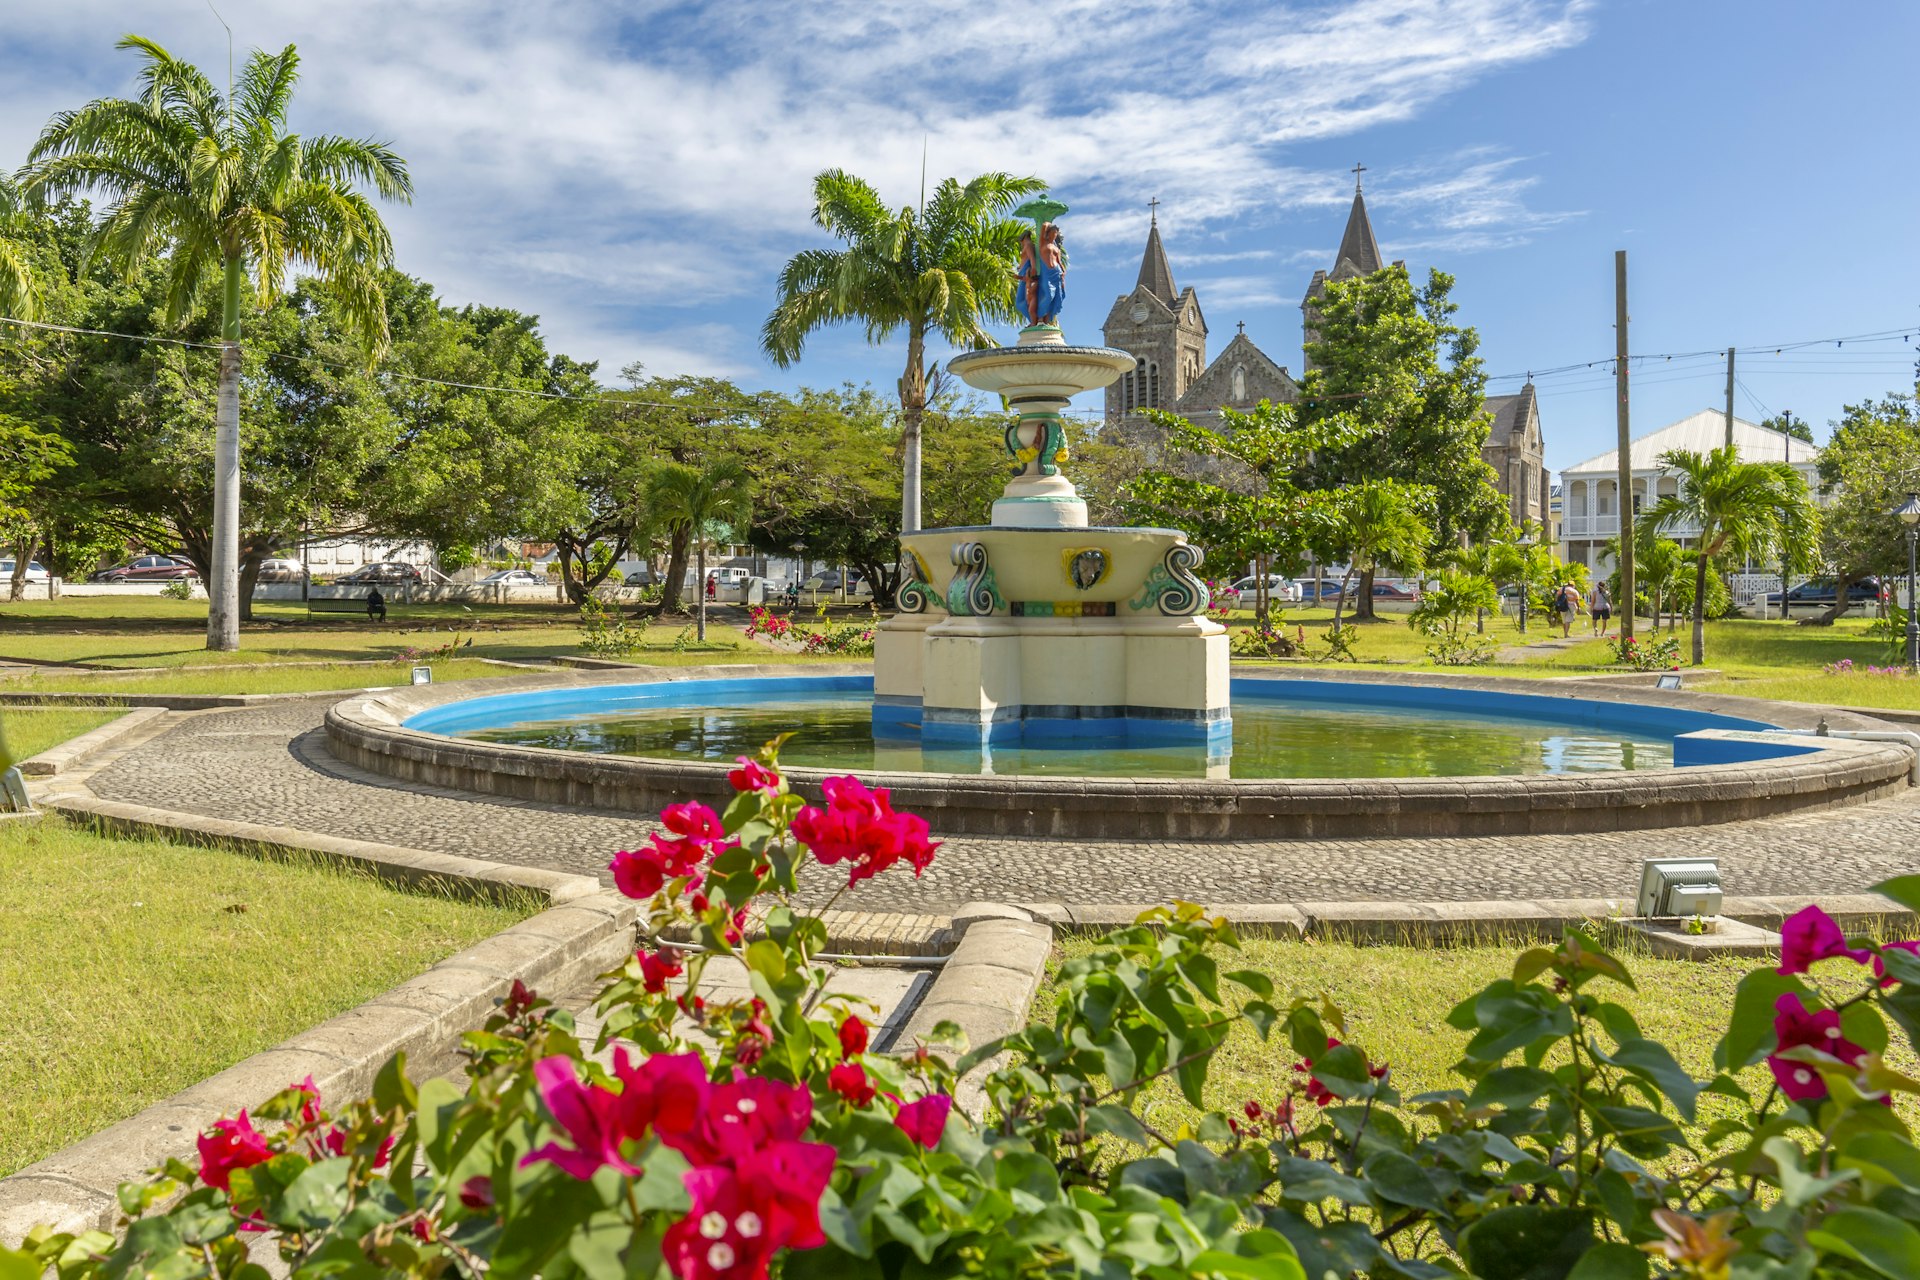 View of flowers and trees around the fountain at Independence Square and Immaculate Conception Catholic Co-Cathedral, Basseterre, St. Kitts